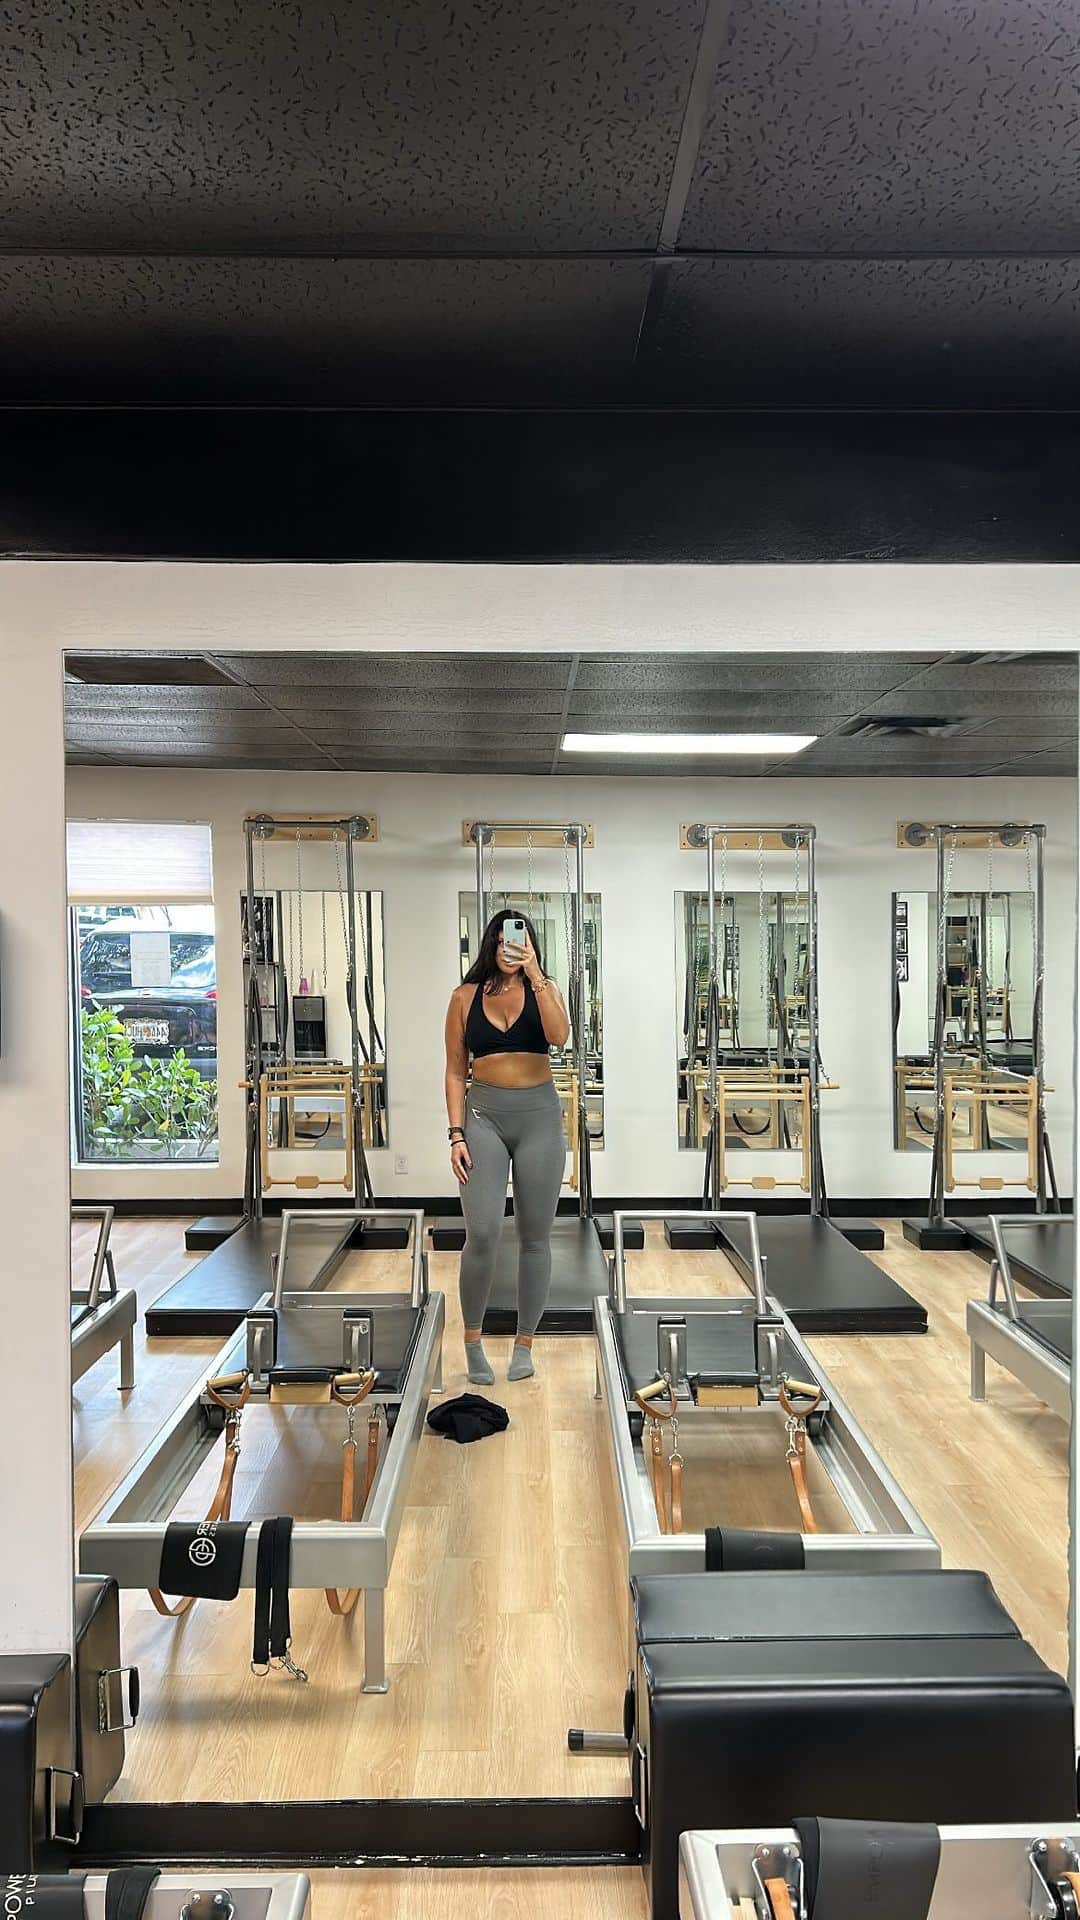 La'Tecia Thomasのインスタグラム：「This is your sign to try something you’re  afraid to try!  About a year ago now I started my reformer pilates journey. I remember mentioning in my stories that I was nervous to go to a class as I felt like I would be judged and  judge myself. Fast forward a year, I attend two classes a week and I absolutely love it! It’s something that I truly enjoy and look forward each week! Everyone that I’ve met along the way, have been so supportive and kind. I’m always so inspired by everyone’s strength, particularly the women senior to myself, I hope that I can be as strong as they are 🤌 anyhow I’m rambling, basically what I’m saying is try something new, or revisit something u love, u never know what might come from it and how much joy it’ll bring you 🤍」